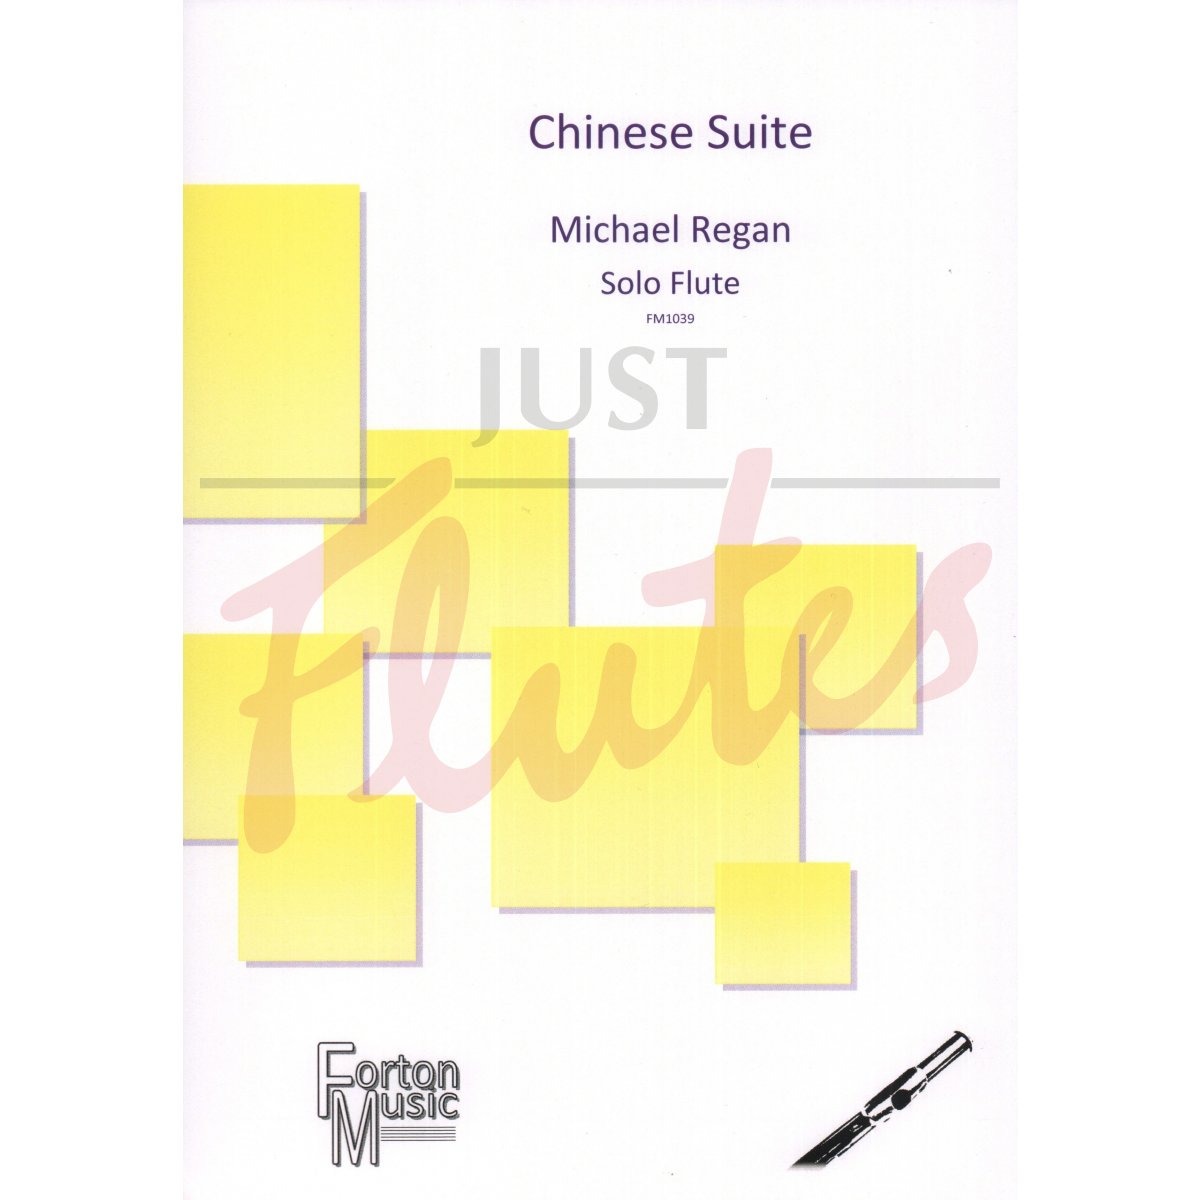 Chinese Suite for Solo Flute